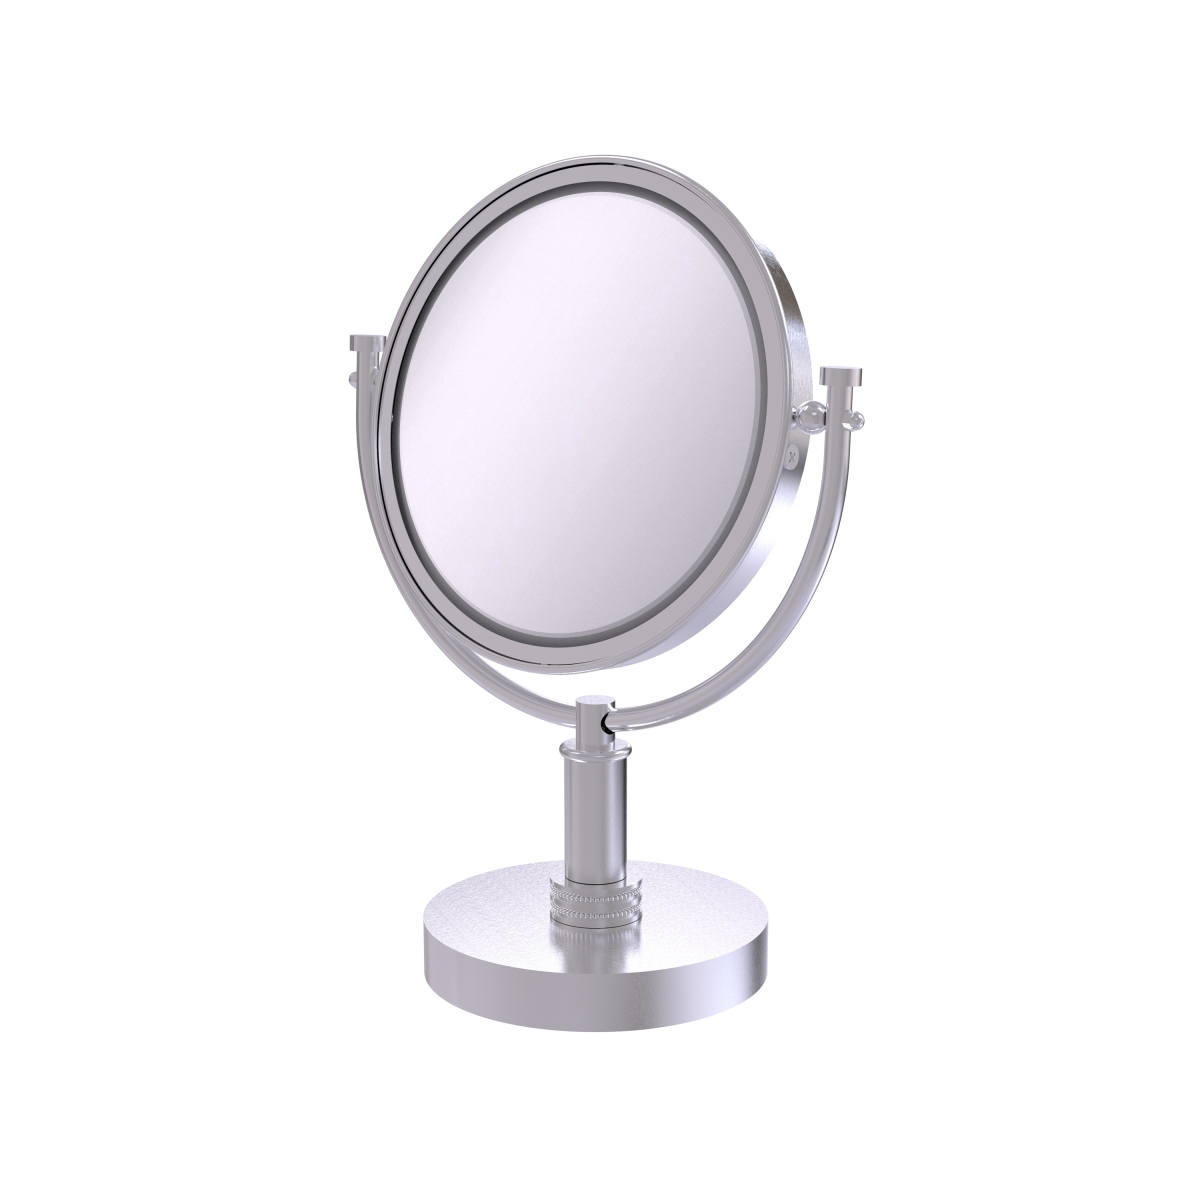 Picture of Allied Brass DM-4D-2X-SCH 8 in. Vanity Top Make-Up Mirror 2X Magnification, Satin Chrome - 15 x 8 x 8 in.